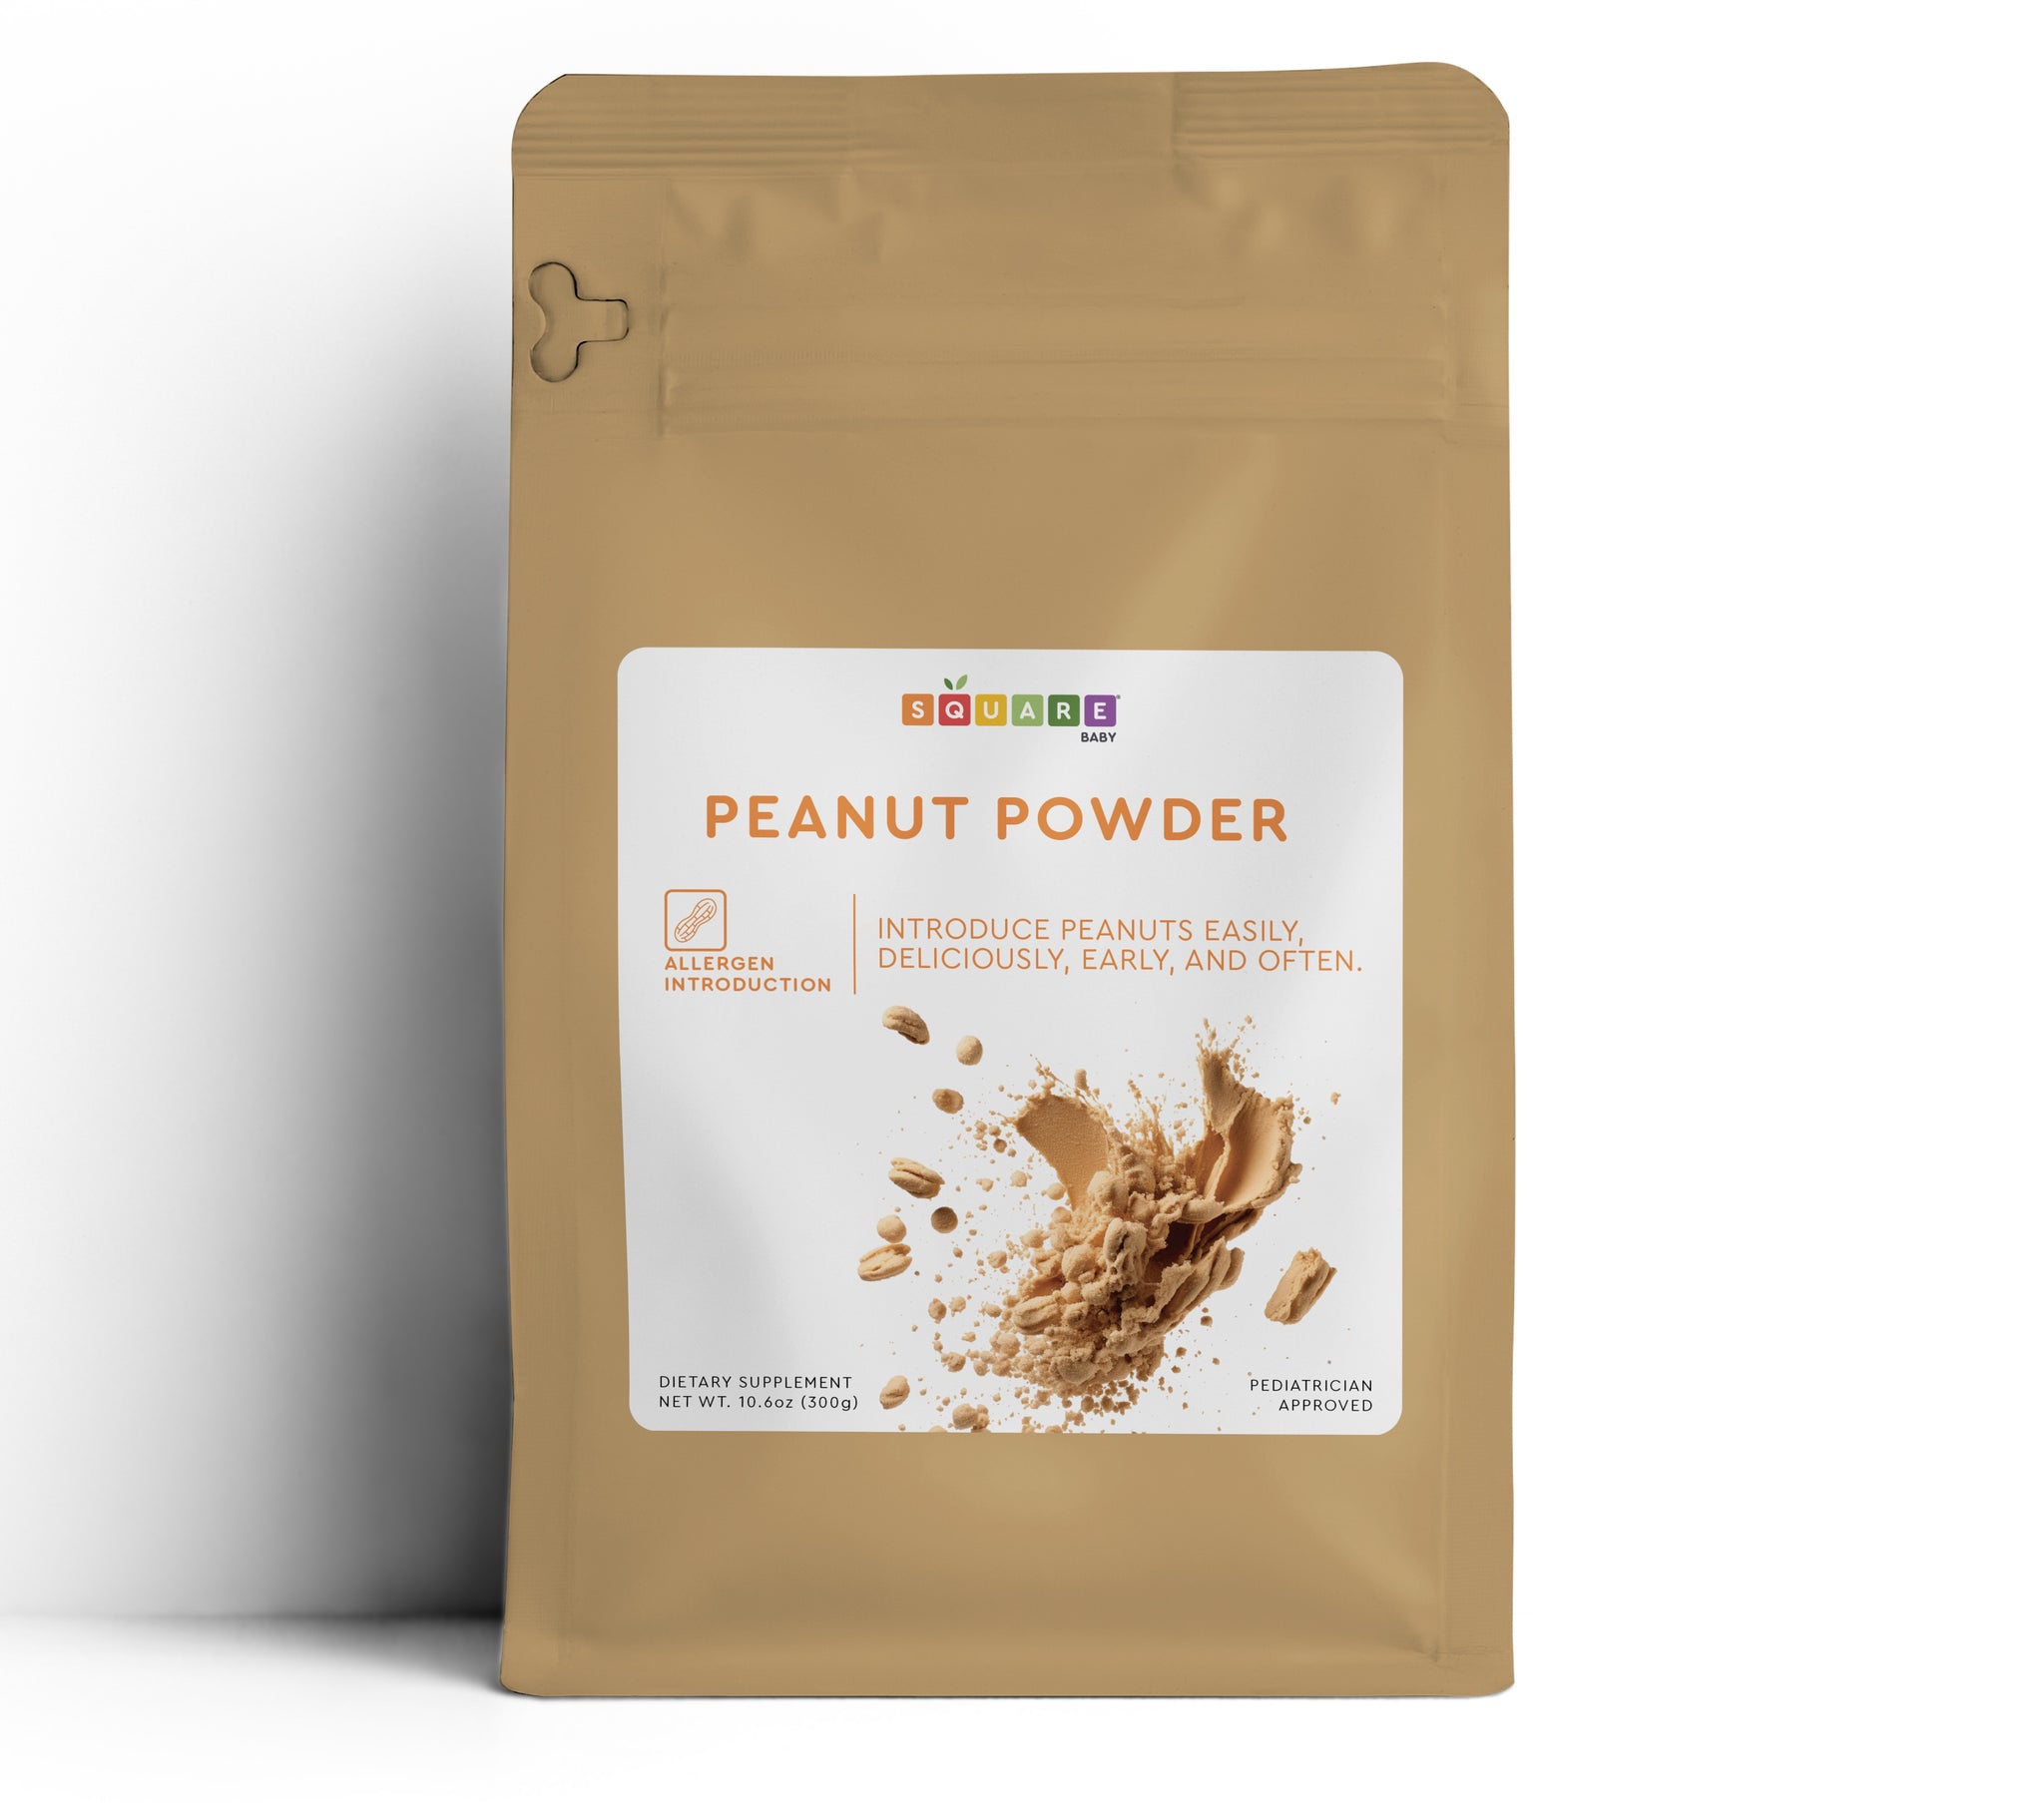 Peanut Powder - Allergen introduction for baby - Square Baby